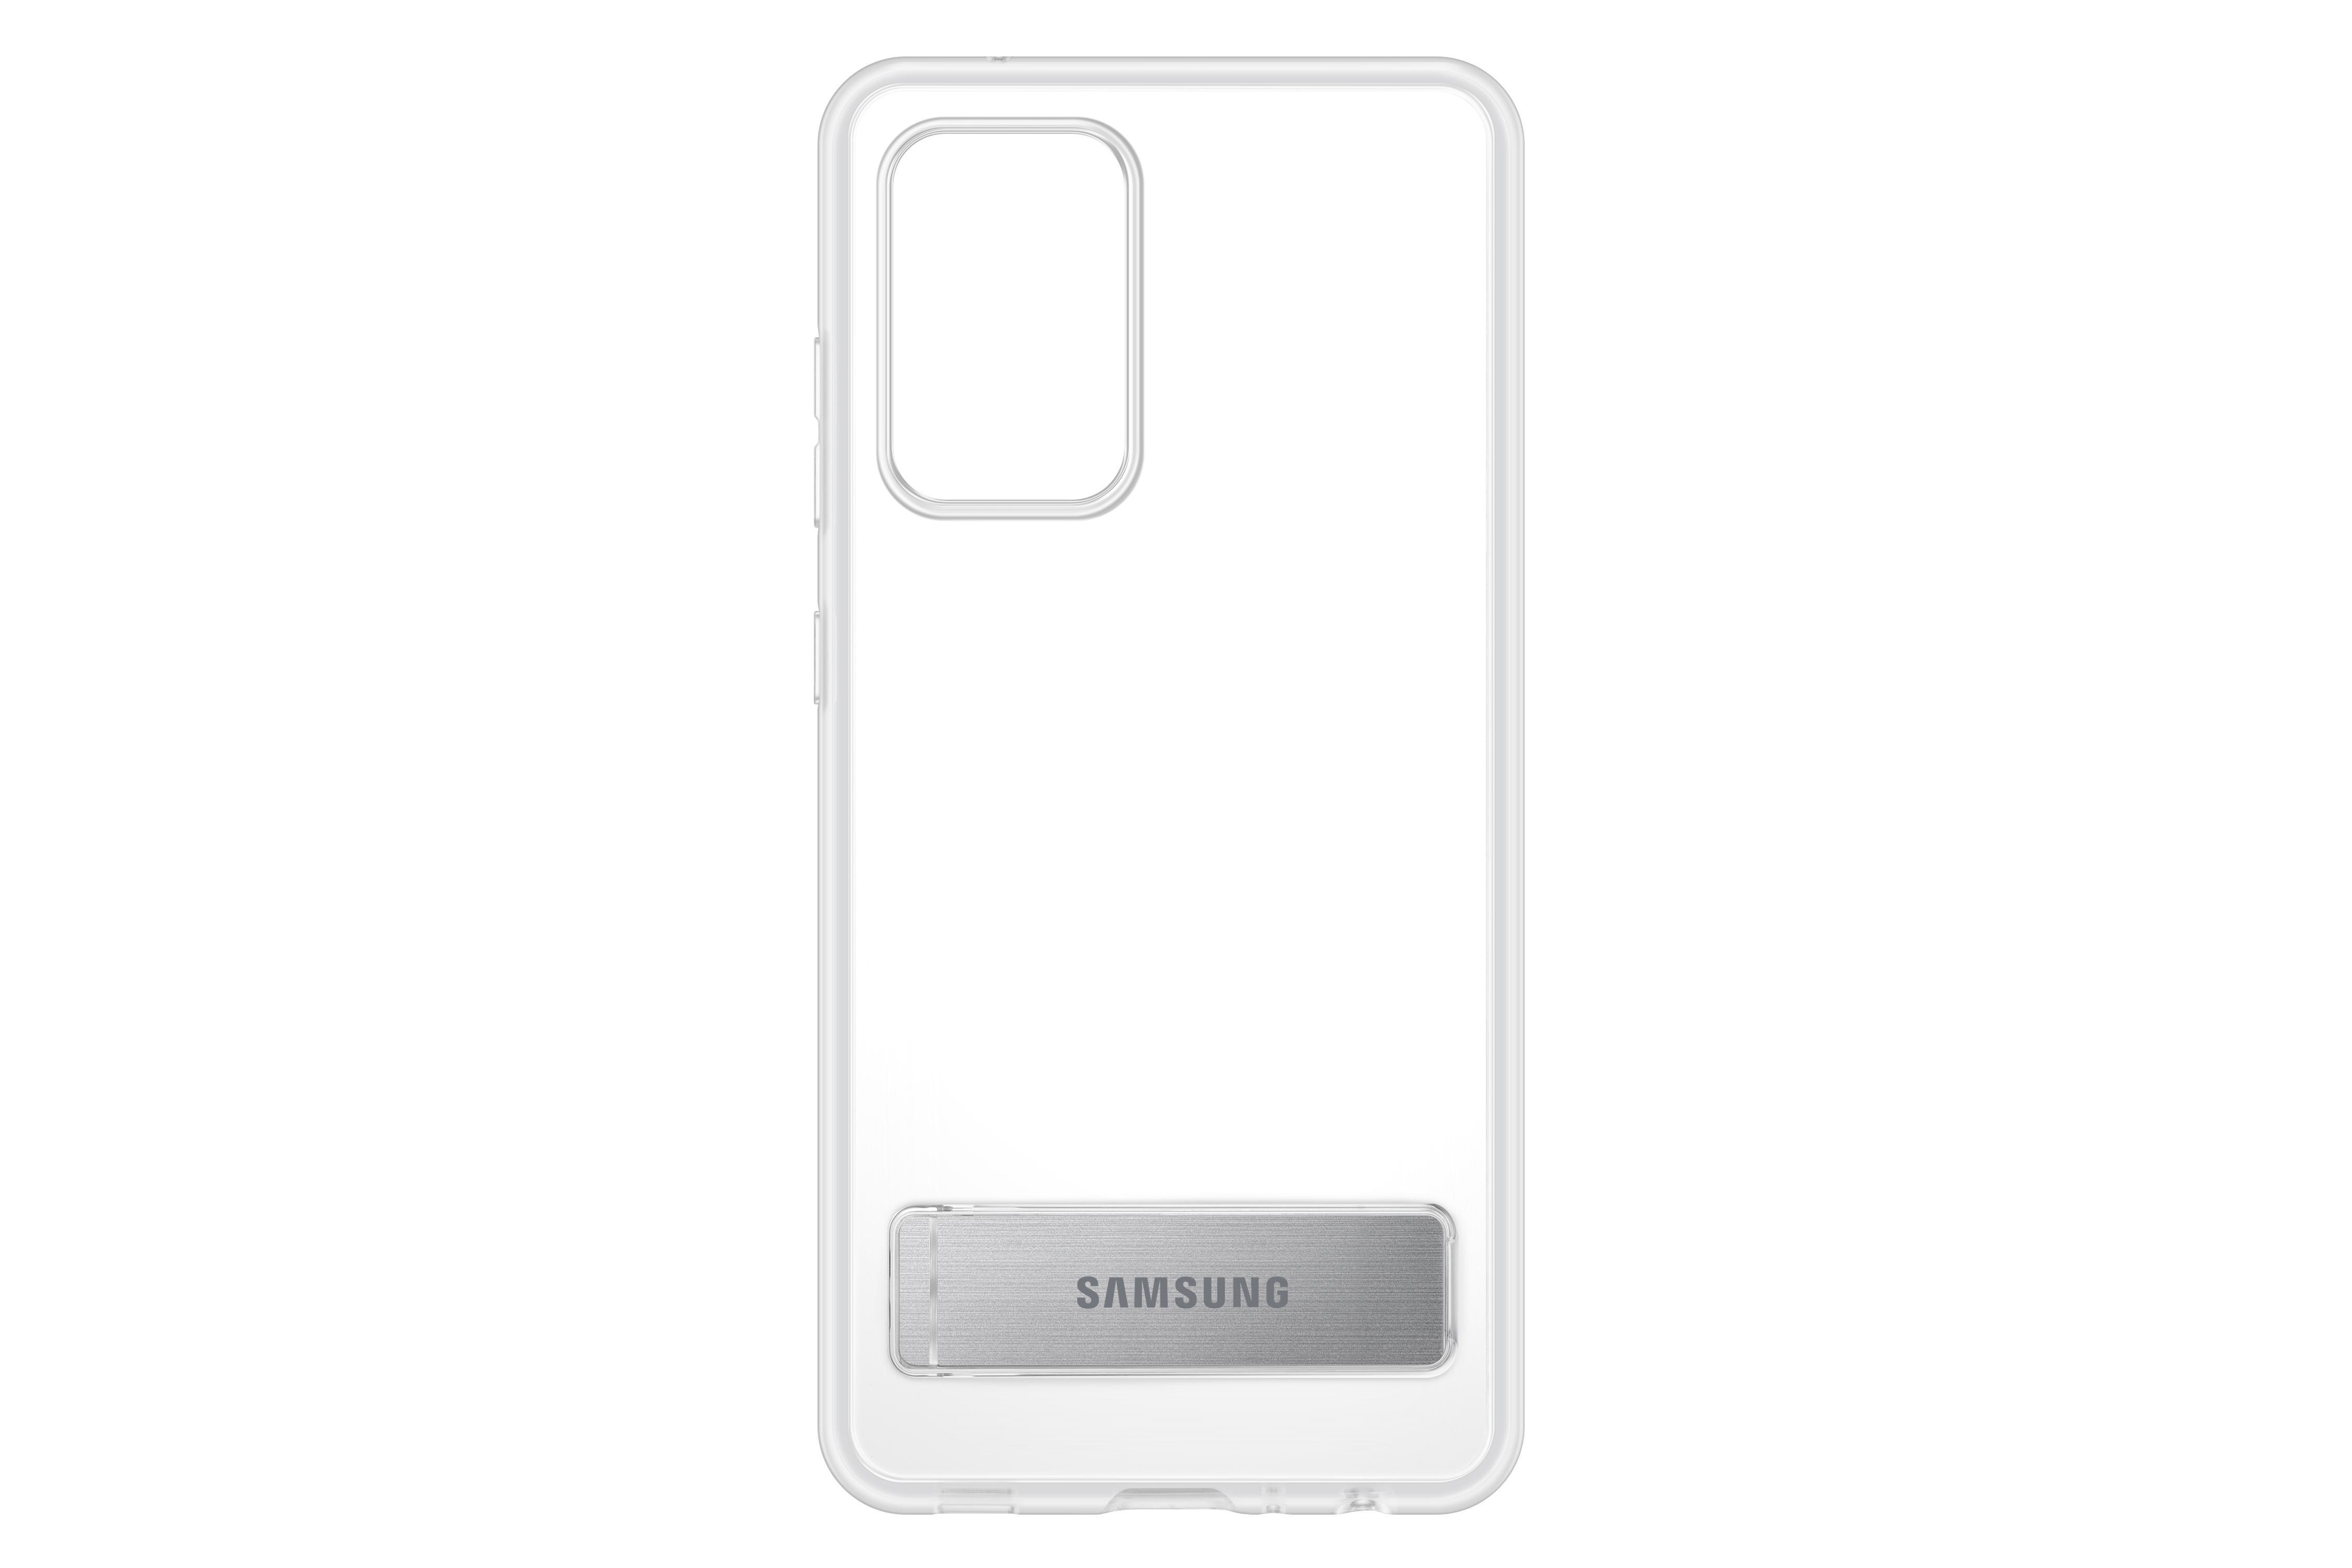 Transparent Galaxy Galaxy A52, A52 Backcover, Samsung, A52s, SAMSUNG Cover, Standing 5G, Clear Galaxy